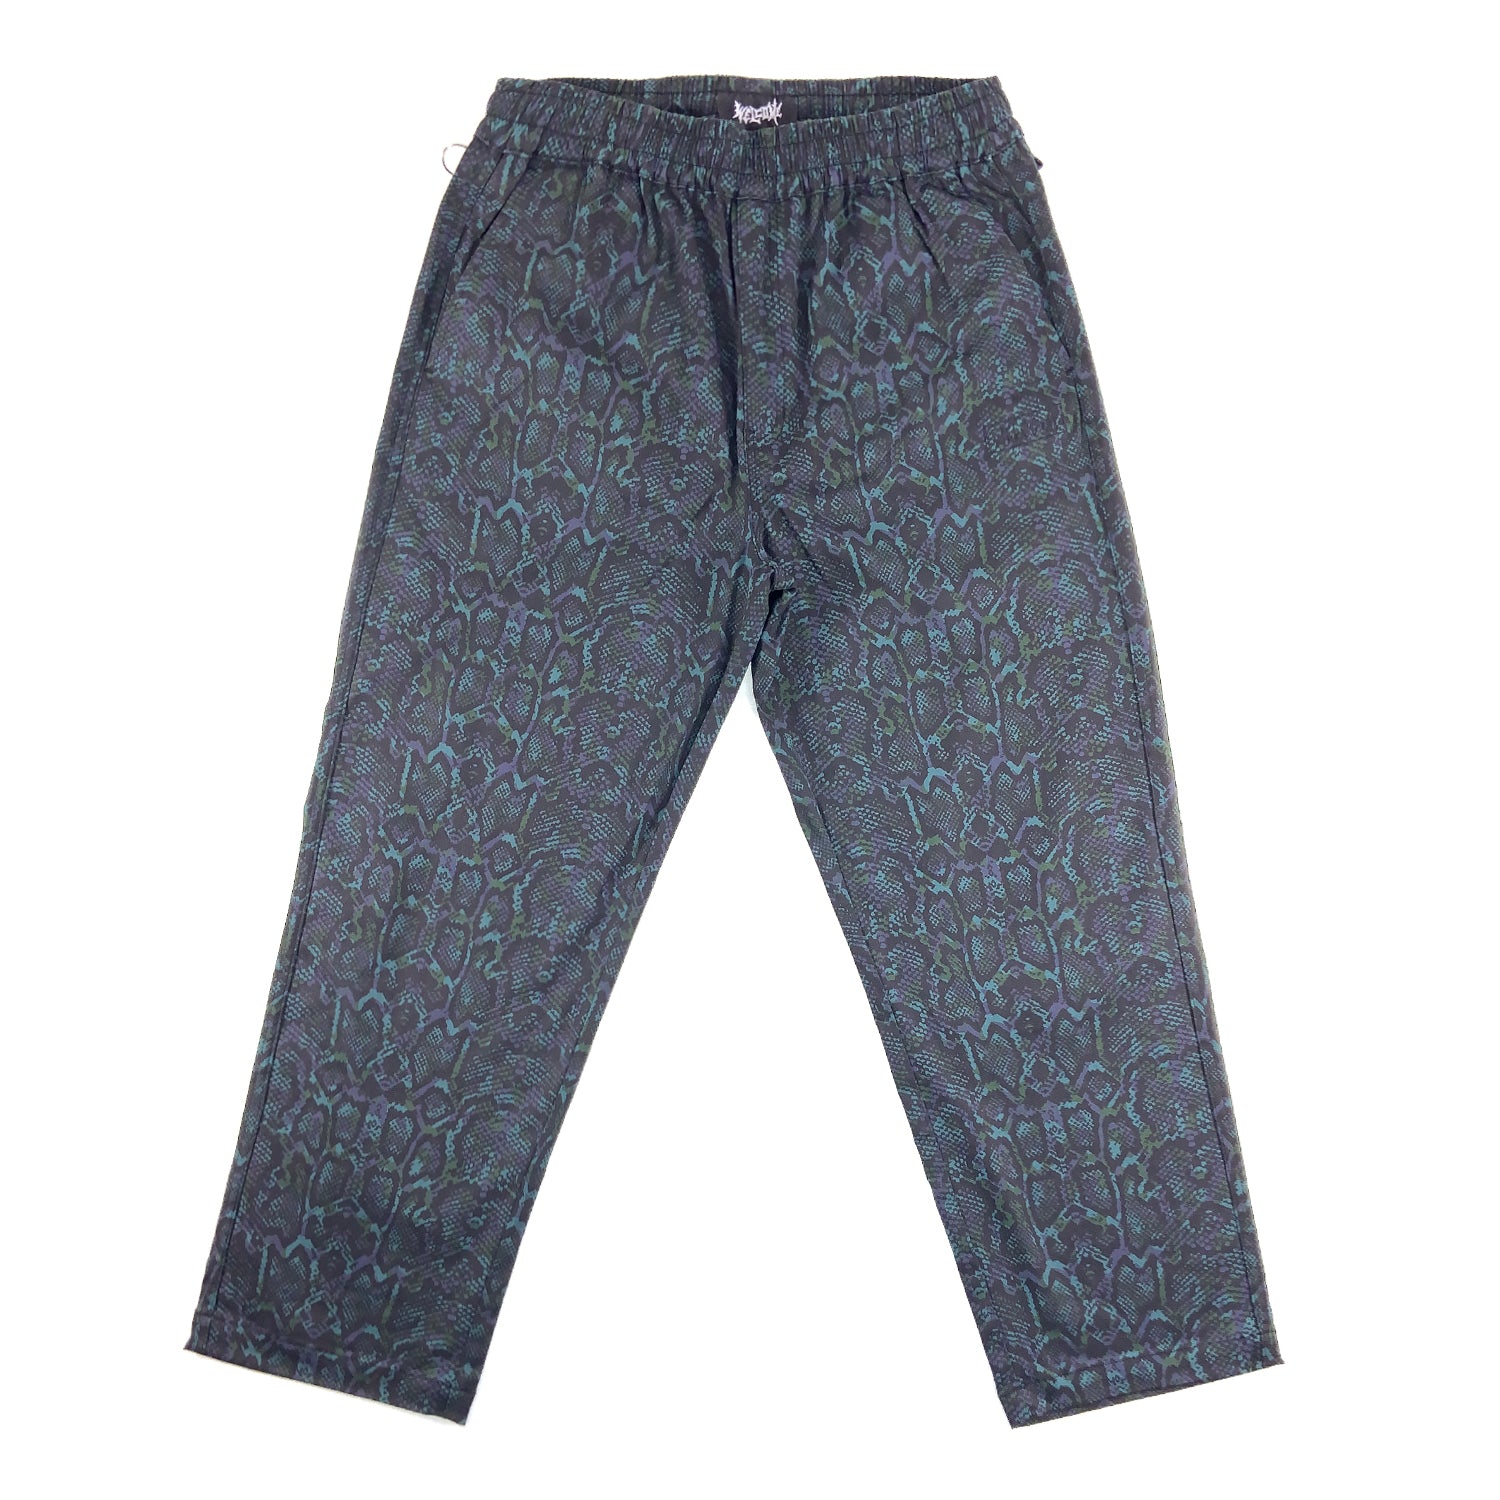 Welcome - Fauna Printed Twill Elastic Pants - Spruce - Prime Delux Store